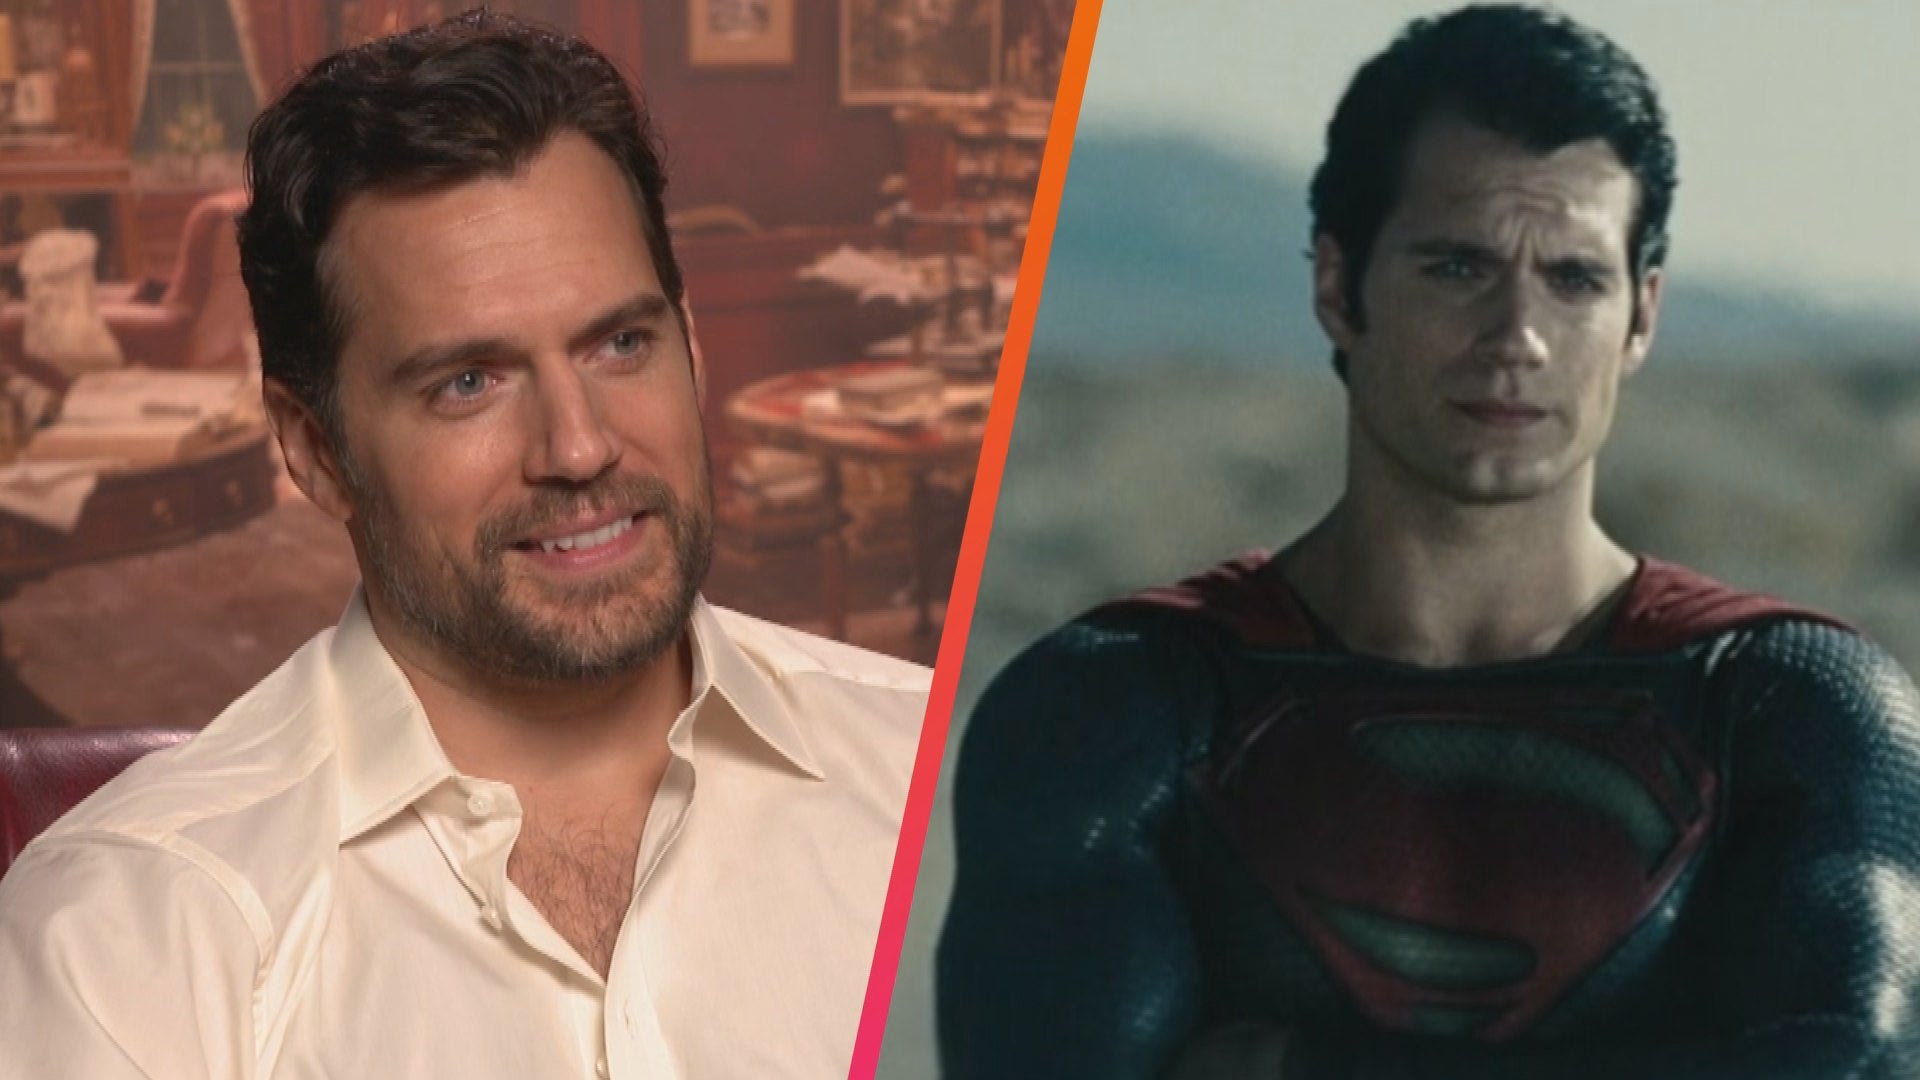 Henry Cavill won't return as Superman in franchise's next movie